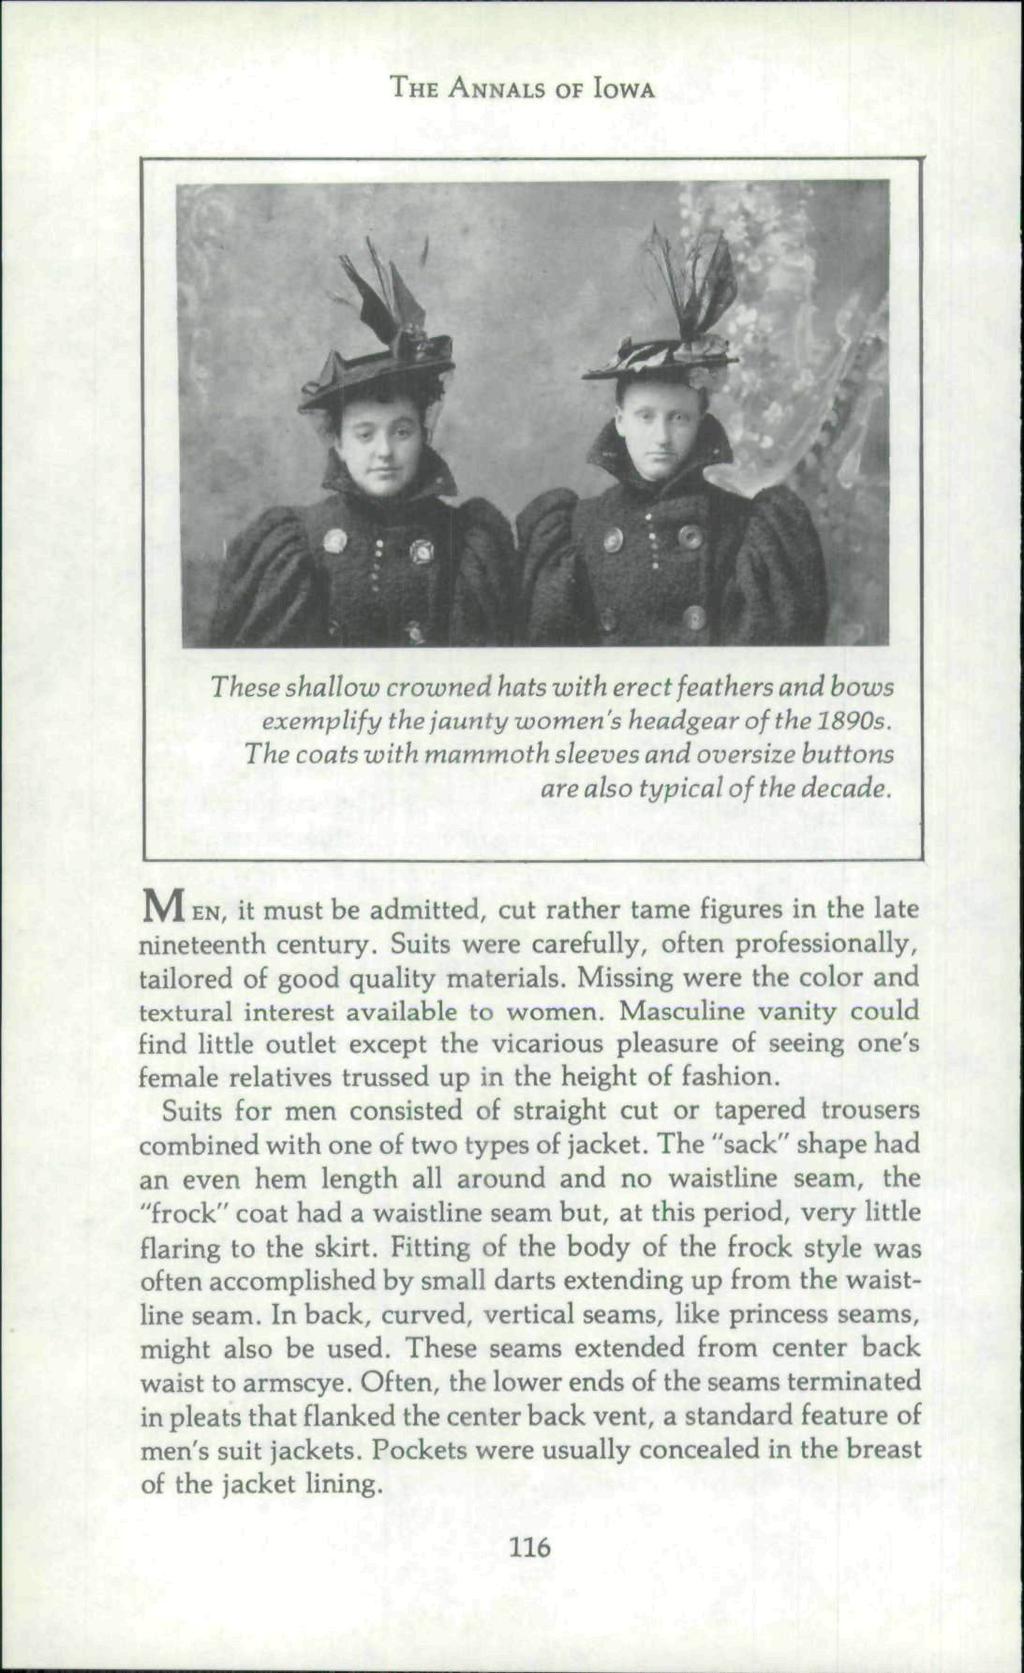 THE ANNALS OF IOWA These shallow crowned hats with erect feathers and bows exemplify the jaunty women's headgear of the 1890s.